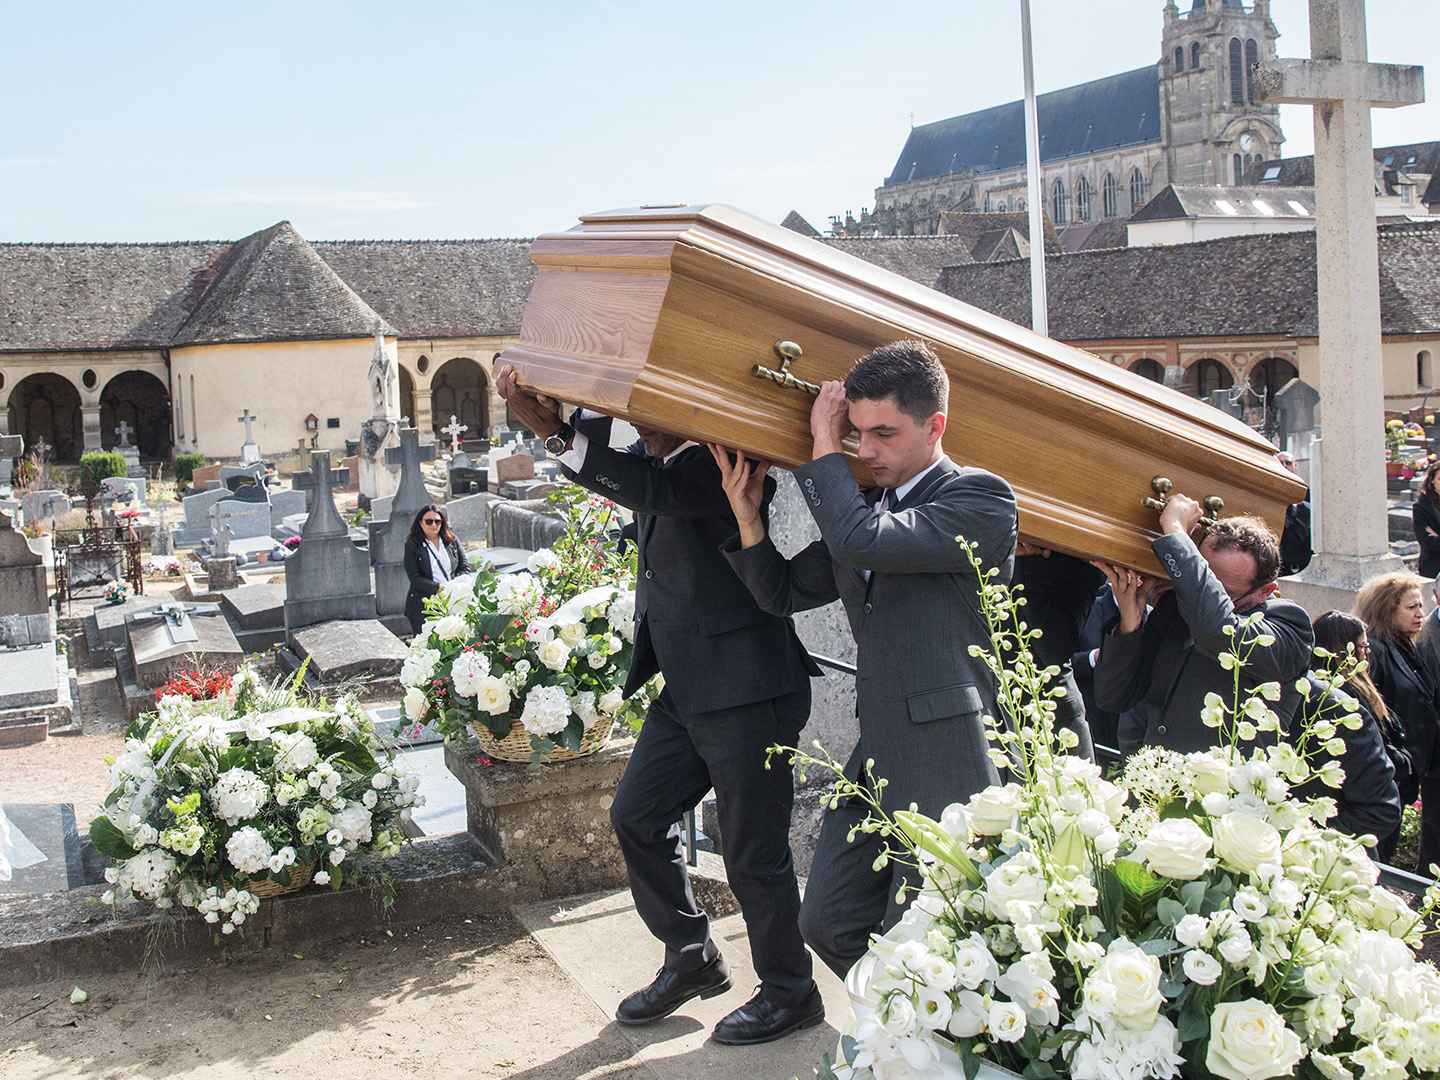 Charles Aznavour is laid to rest at the at Monfort L’Amaury Cemetery after a private funeral on October 6.